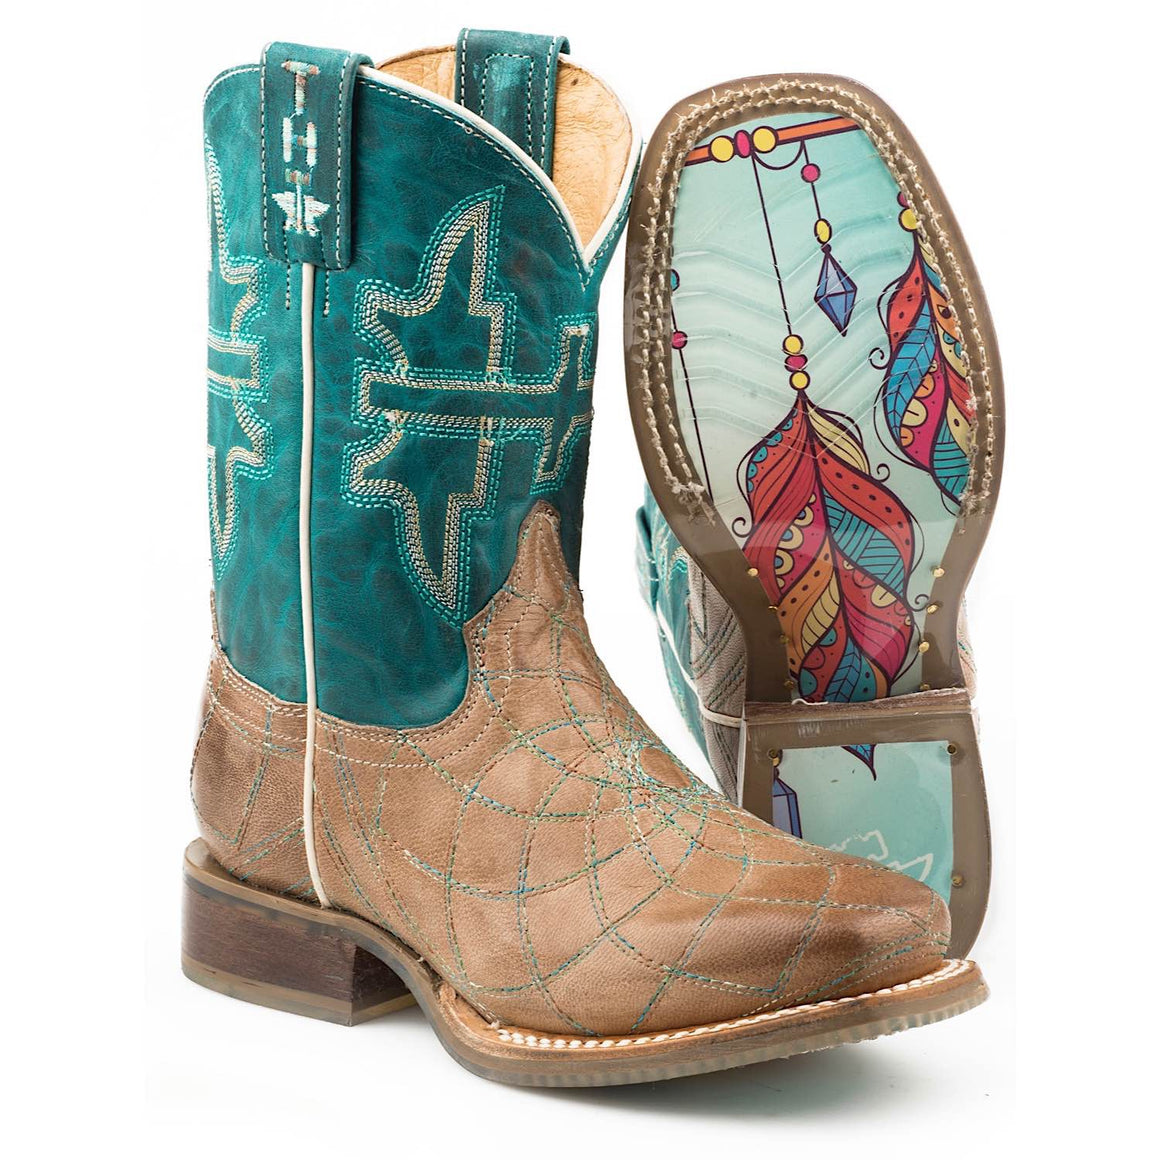 Buy On Sale Tin Haul Boots - The Stable Door